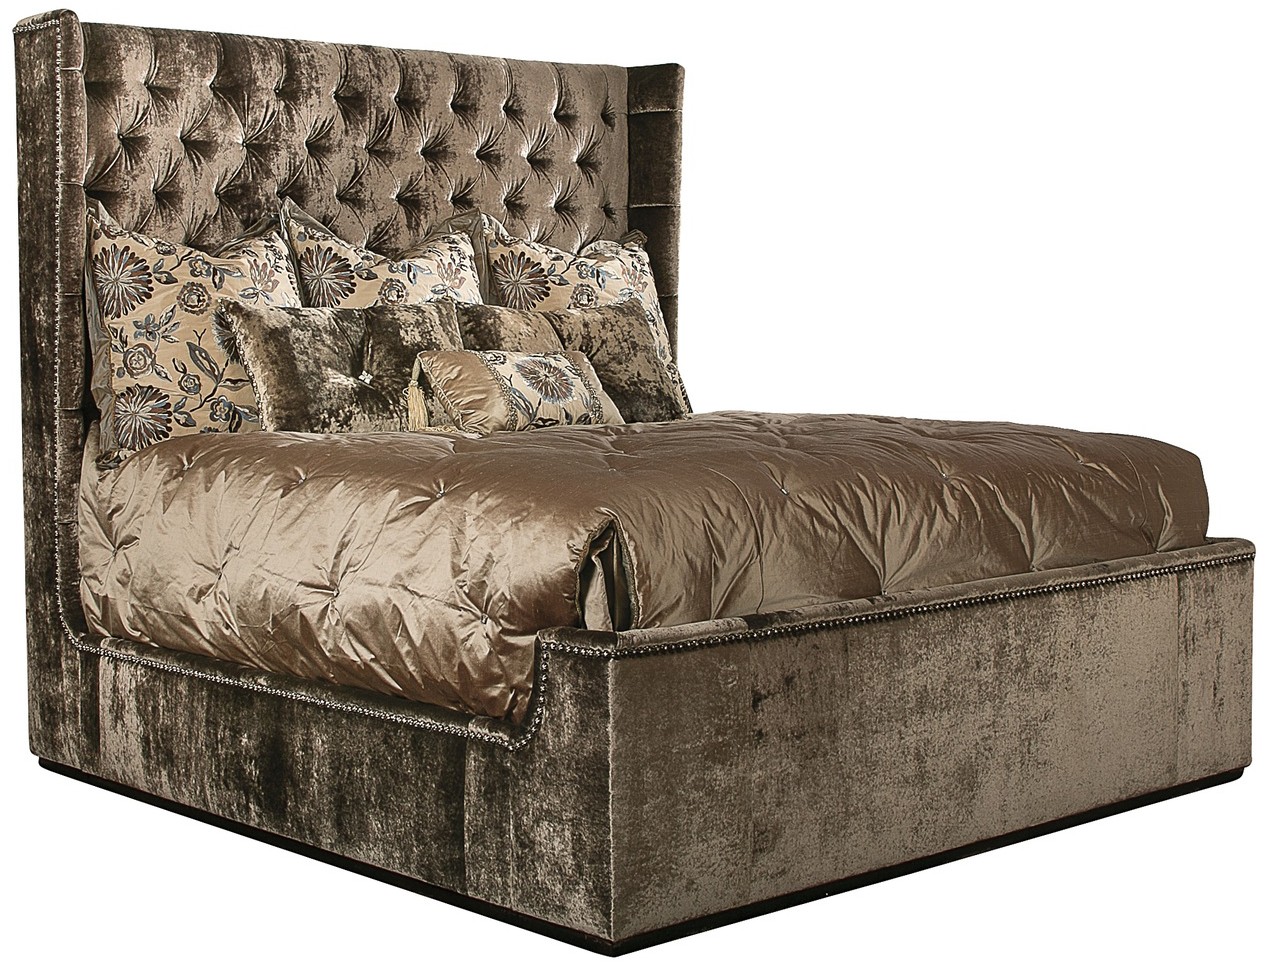 BEDS - Queen, King & California King Sizes Luxury modern chic tufted bed